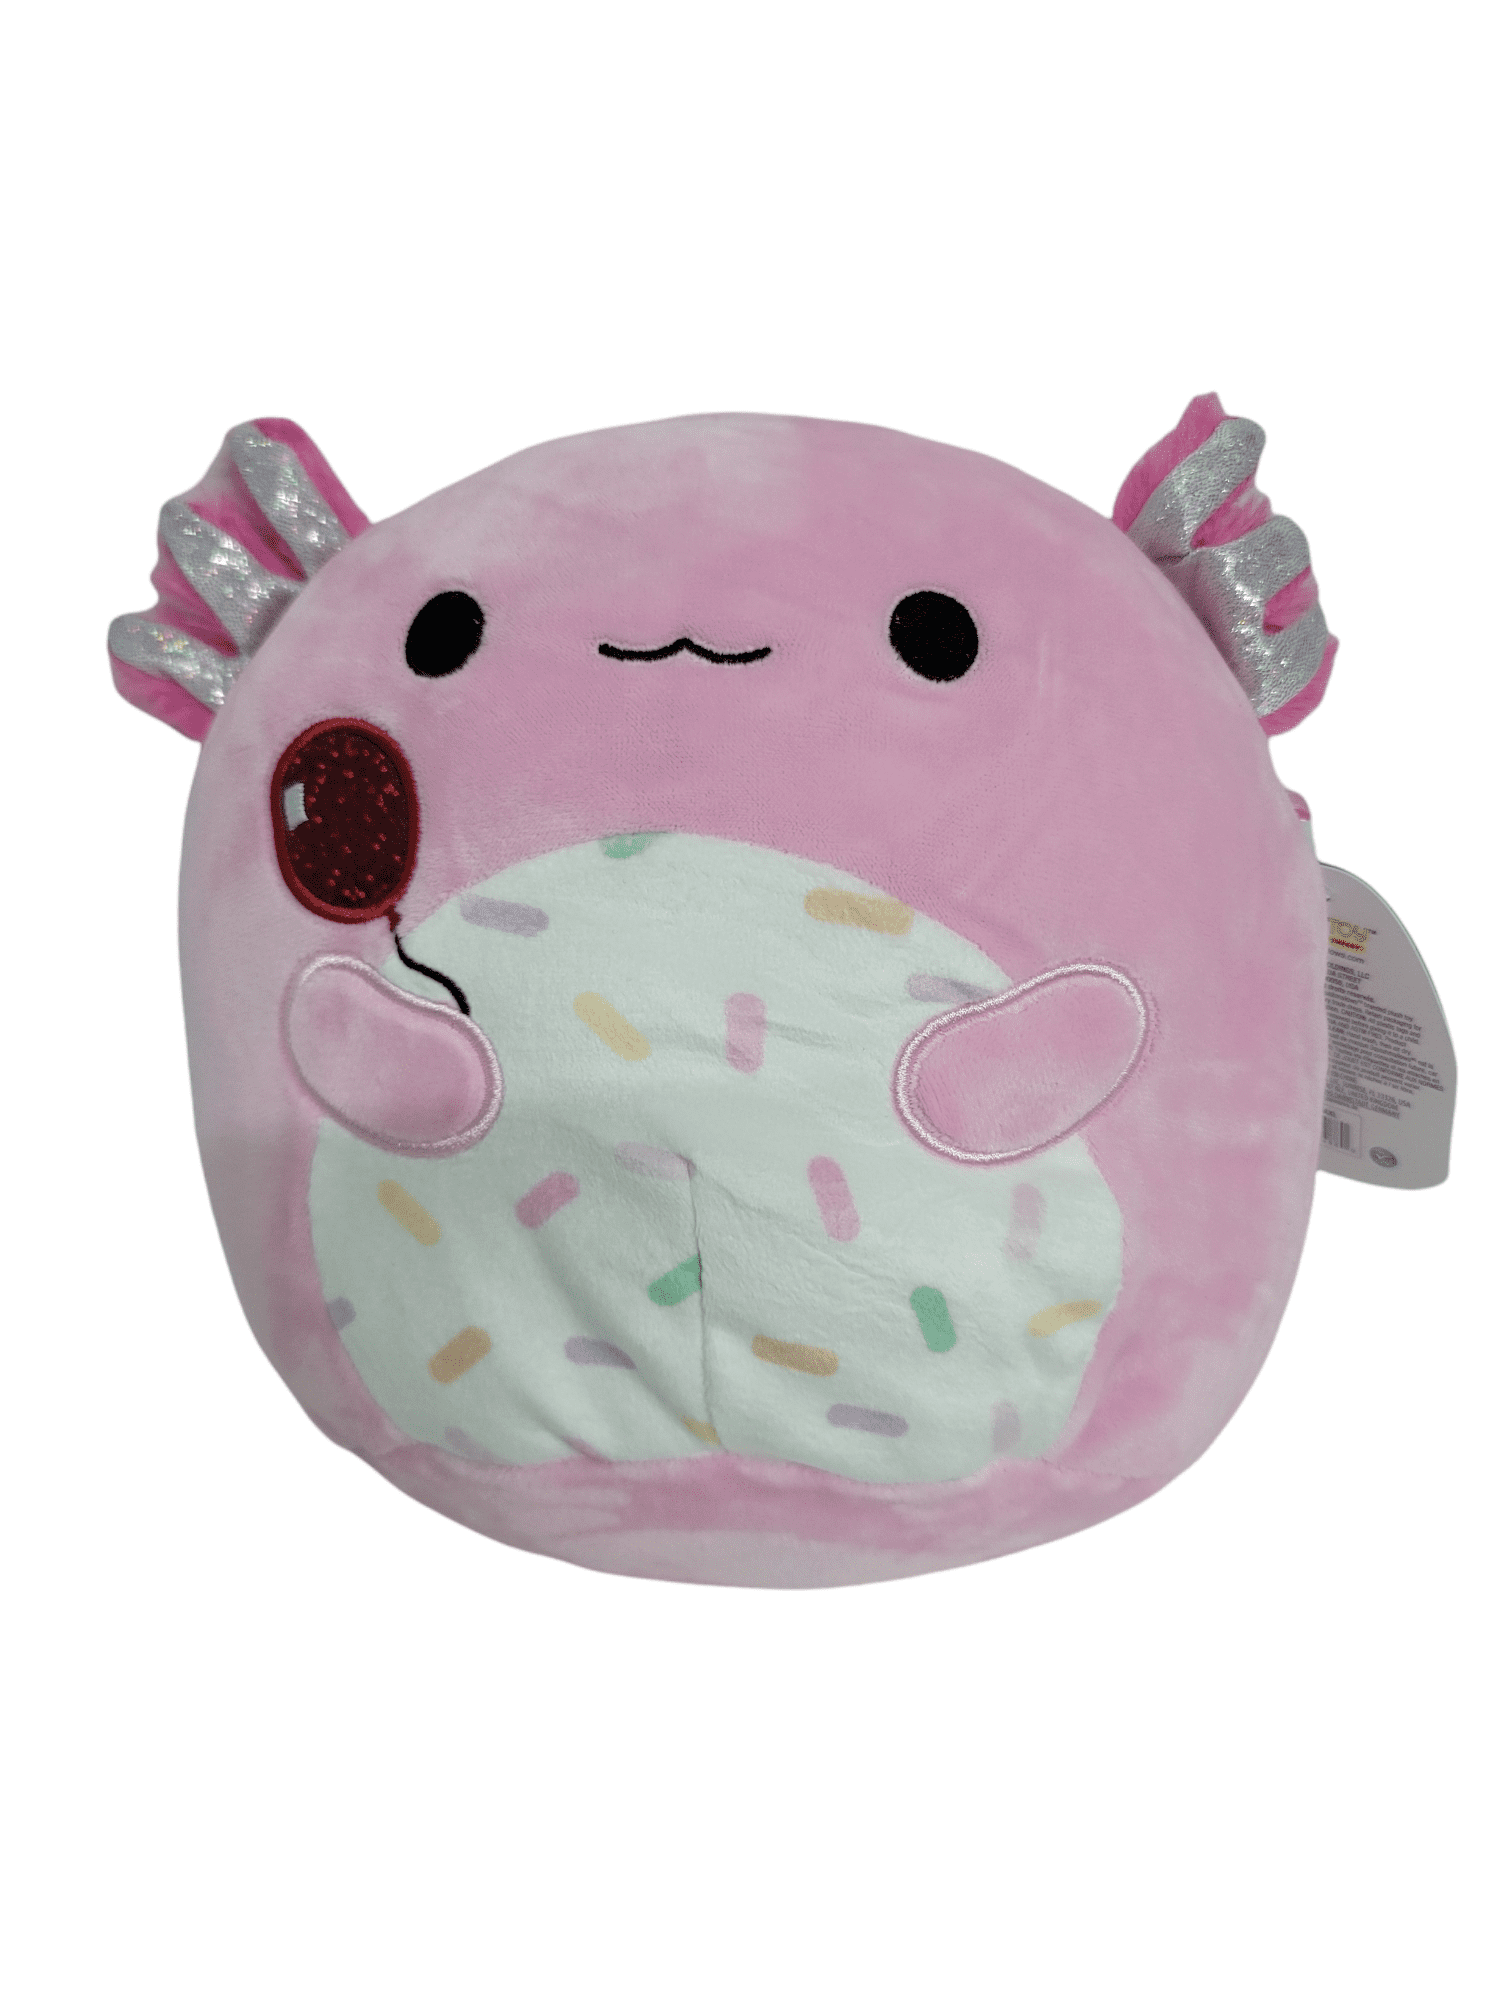 New Archie The Axolotl 8" Squishmallow Pink Plush In Stock Ready to Ship